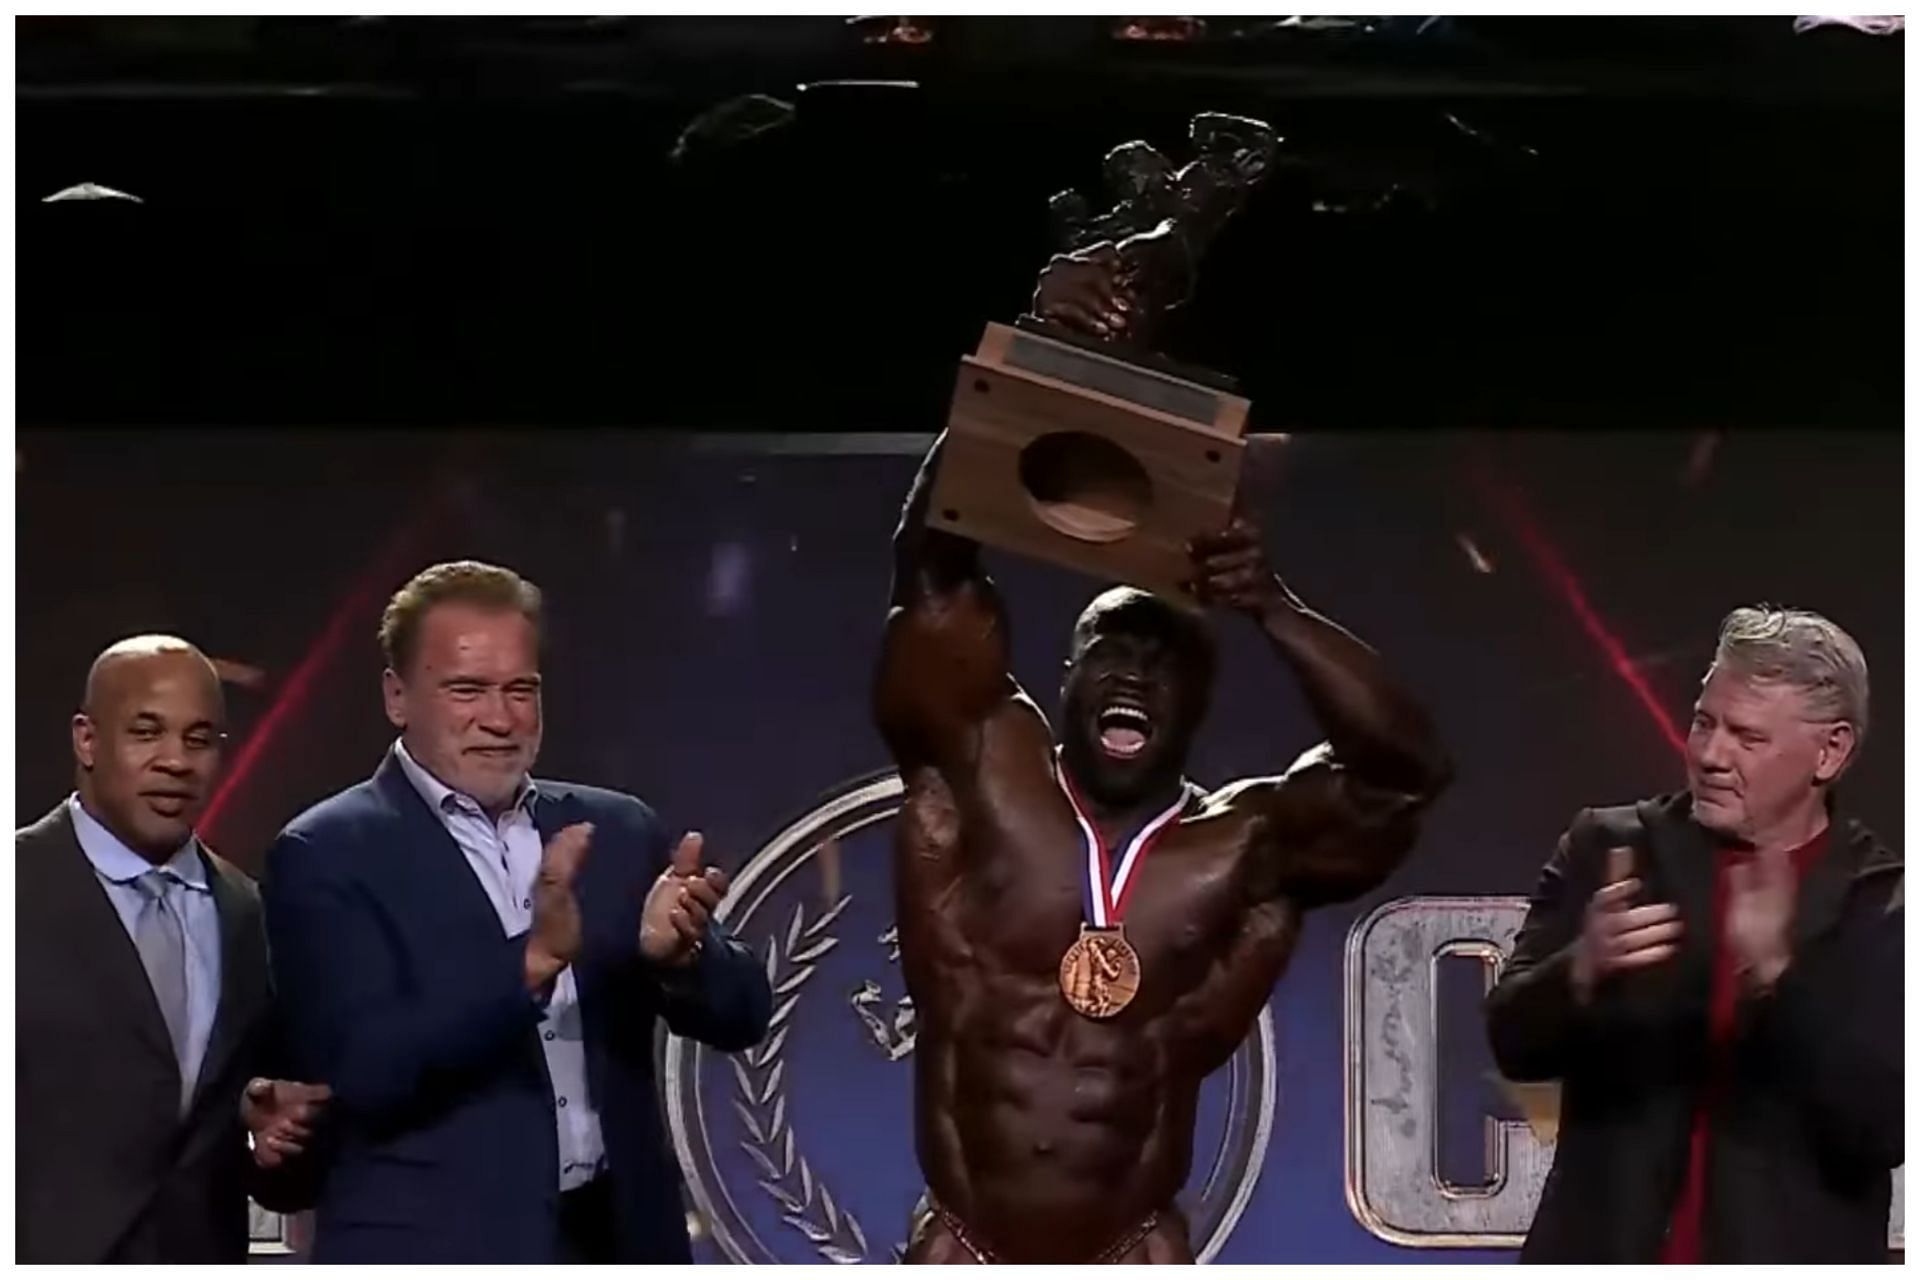 Samson Dauda wins the 2023 Arnold Classic: Image via YouTube (All About Olympia)